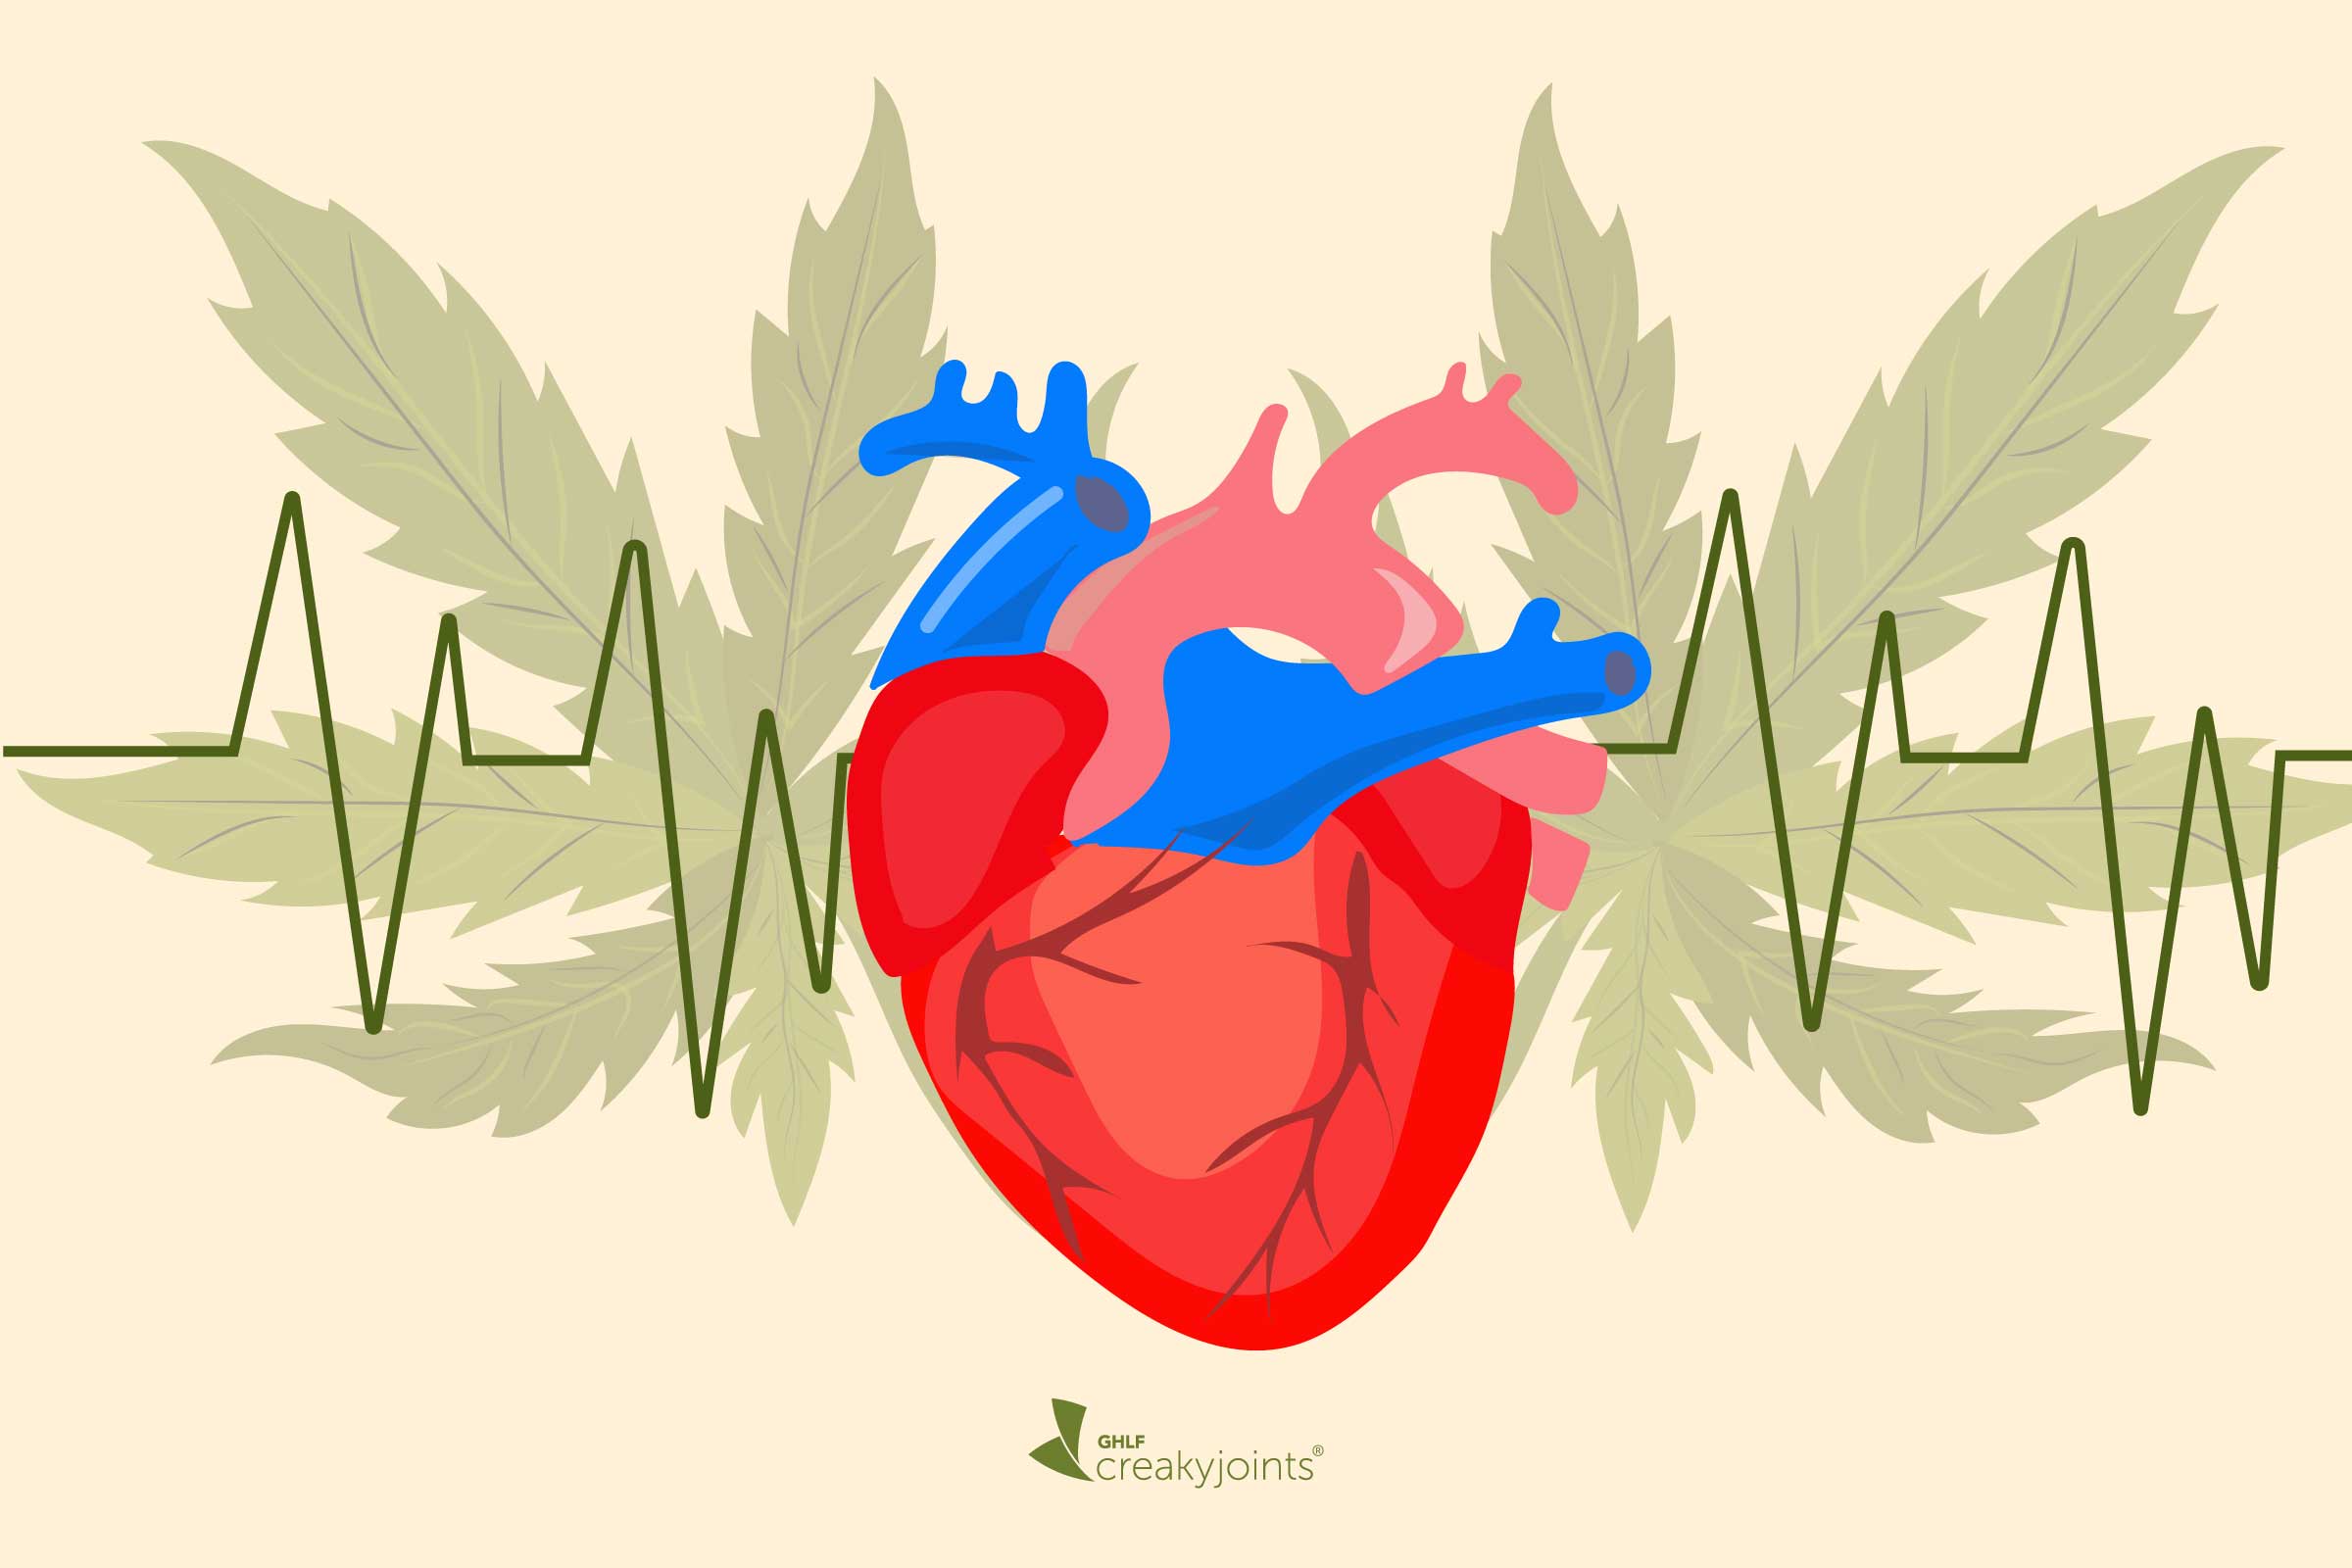 New Studies Show Increased Of Heart Disease If You Consume Cannabis ...